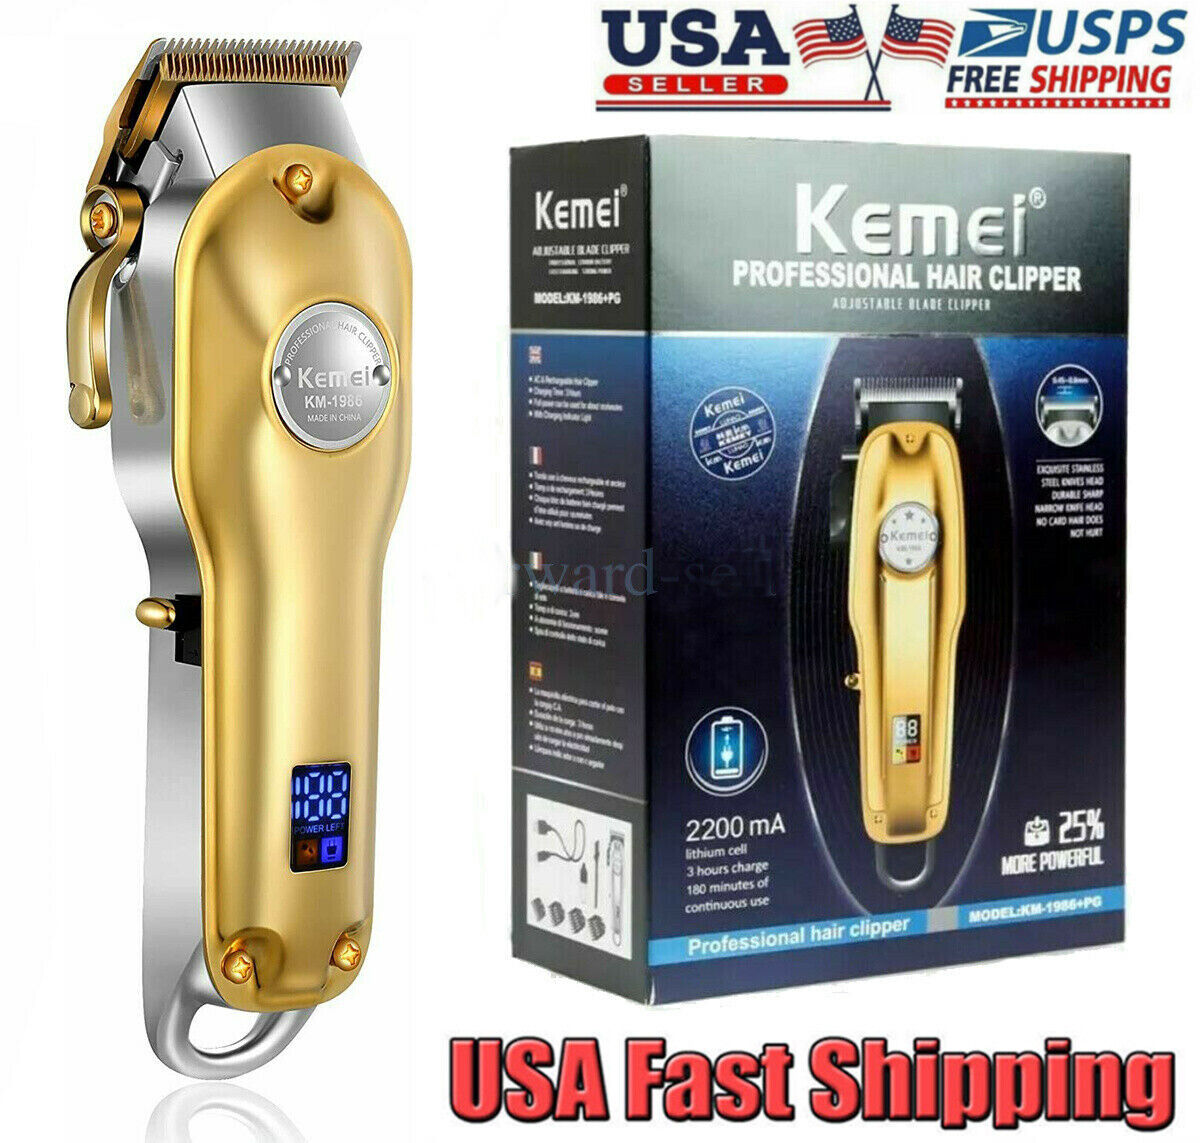 Kemei 1986+PG Professional Hair Clippers Trimmer Kit Hair Cutting Machine Barber